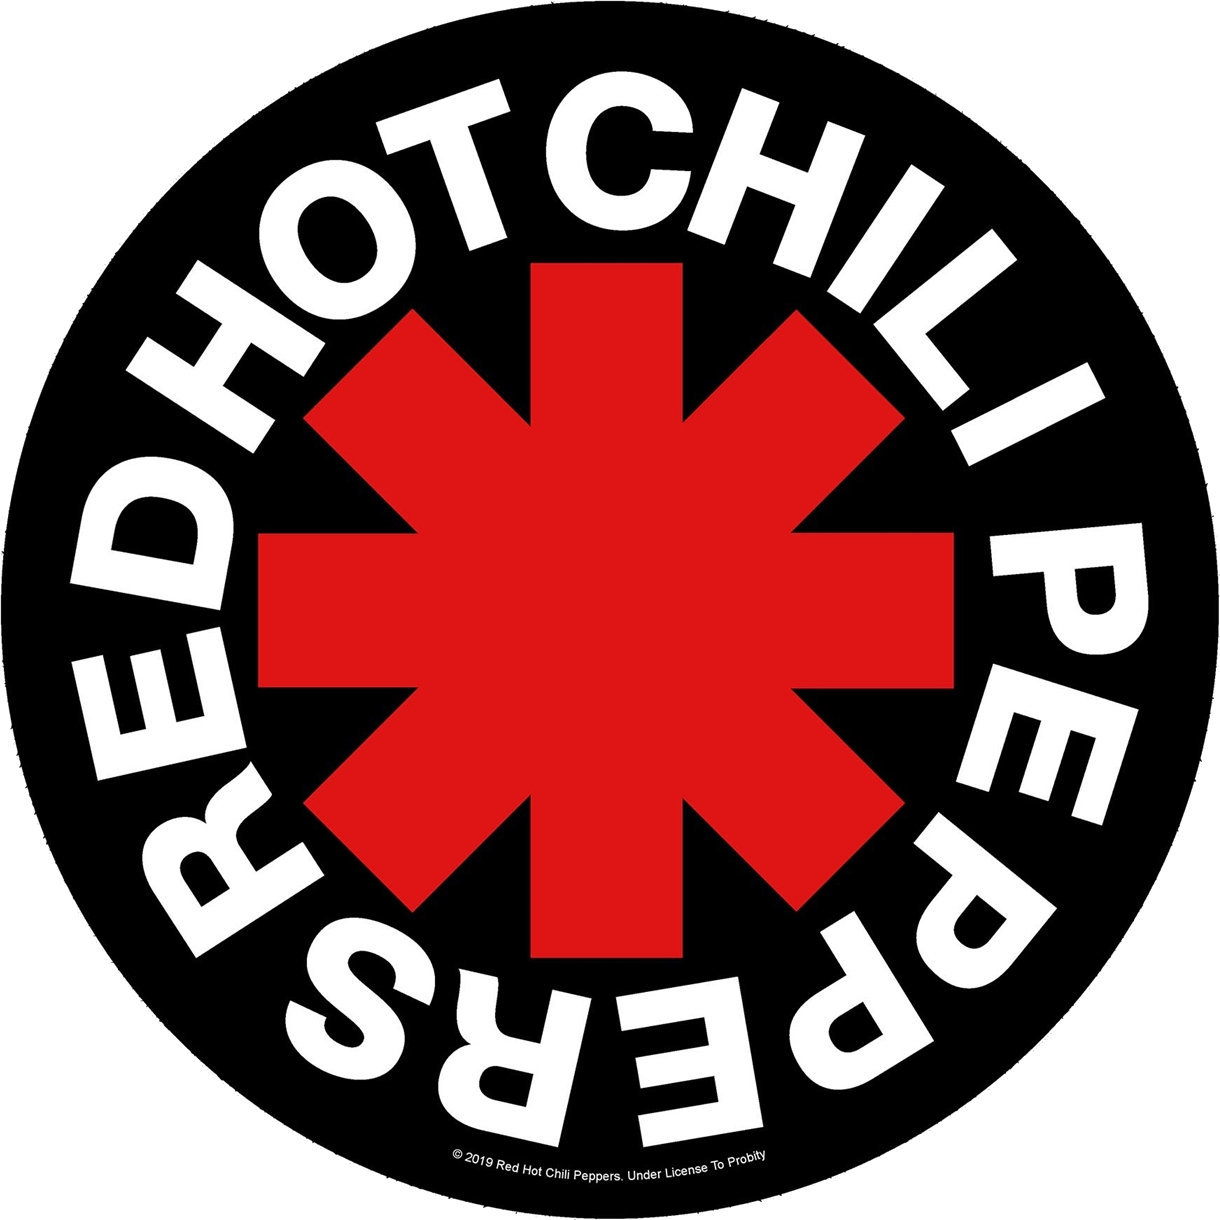 Red hot peppers википедия